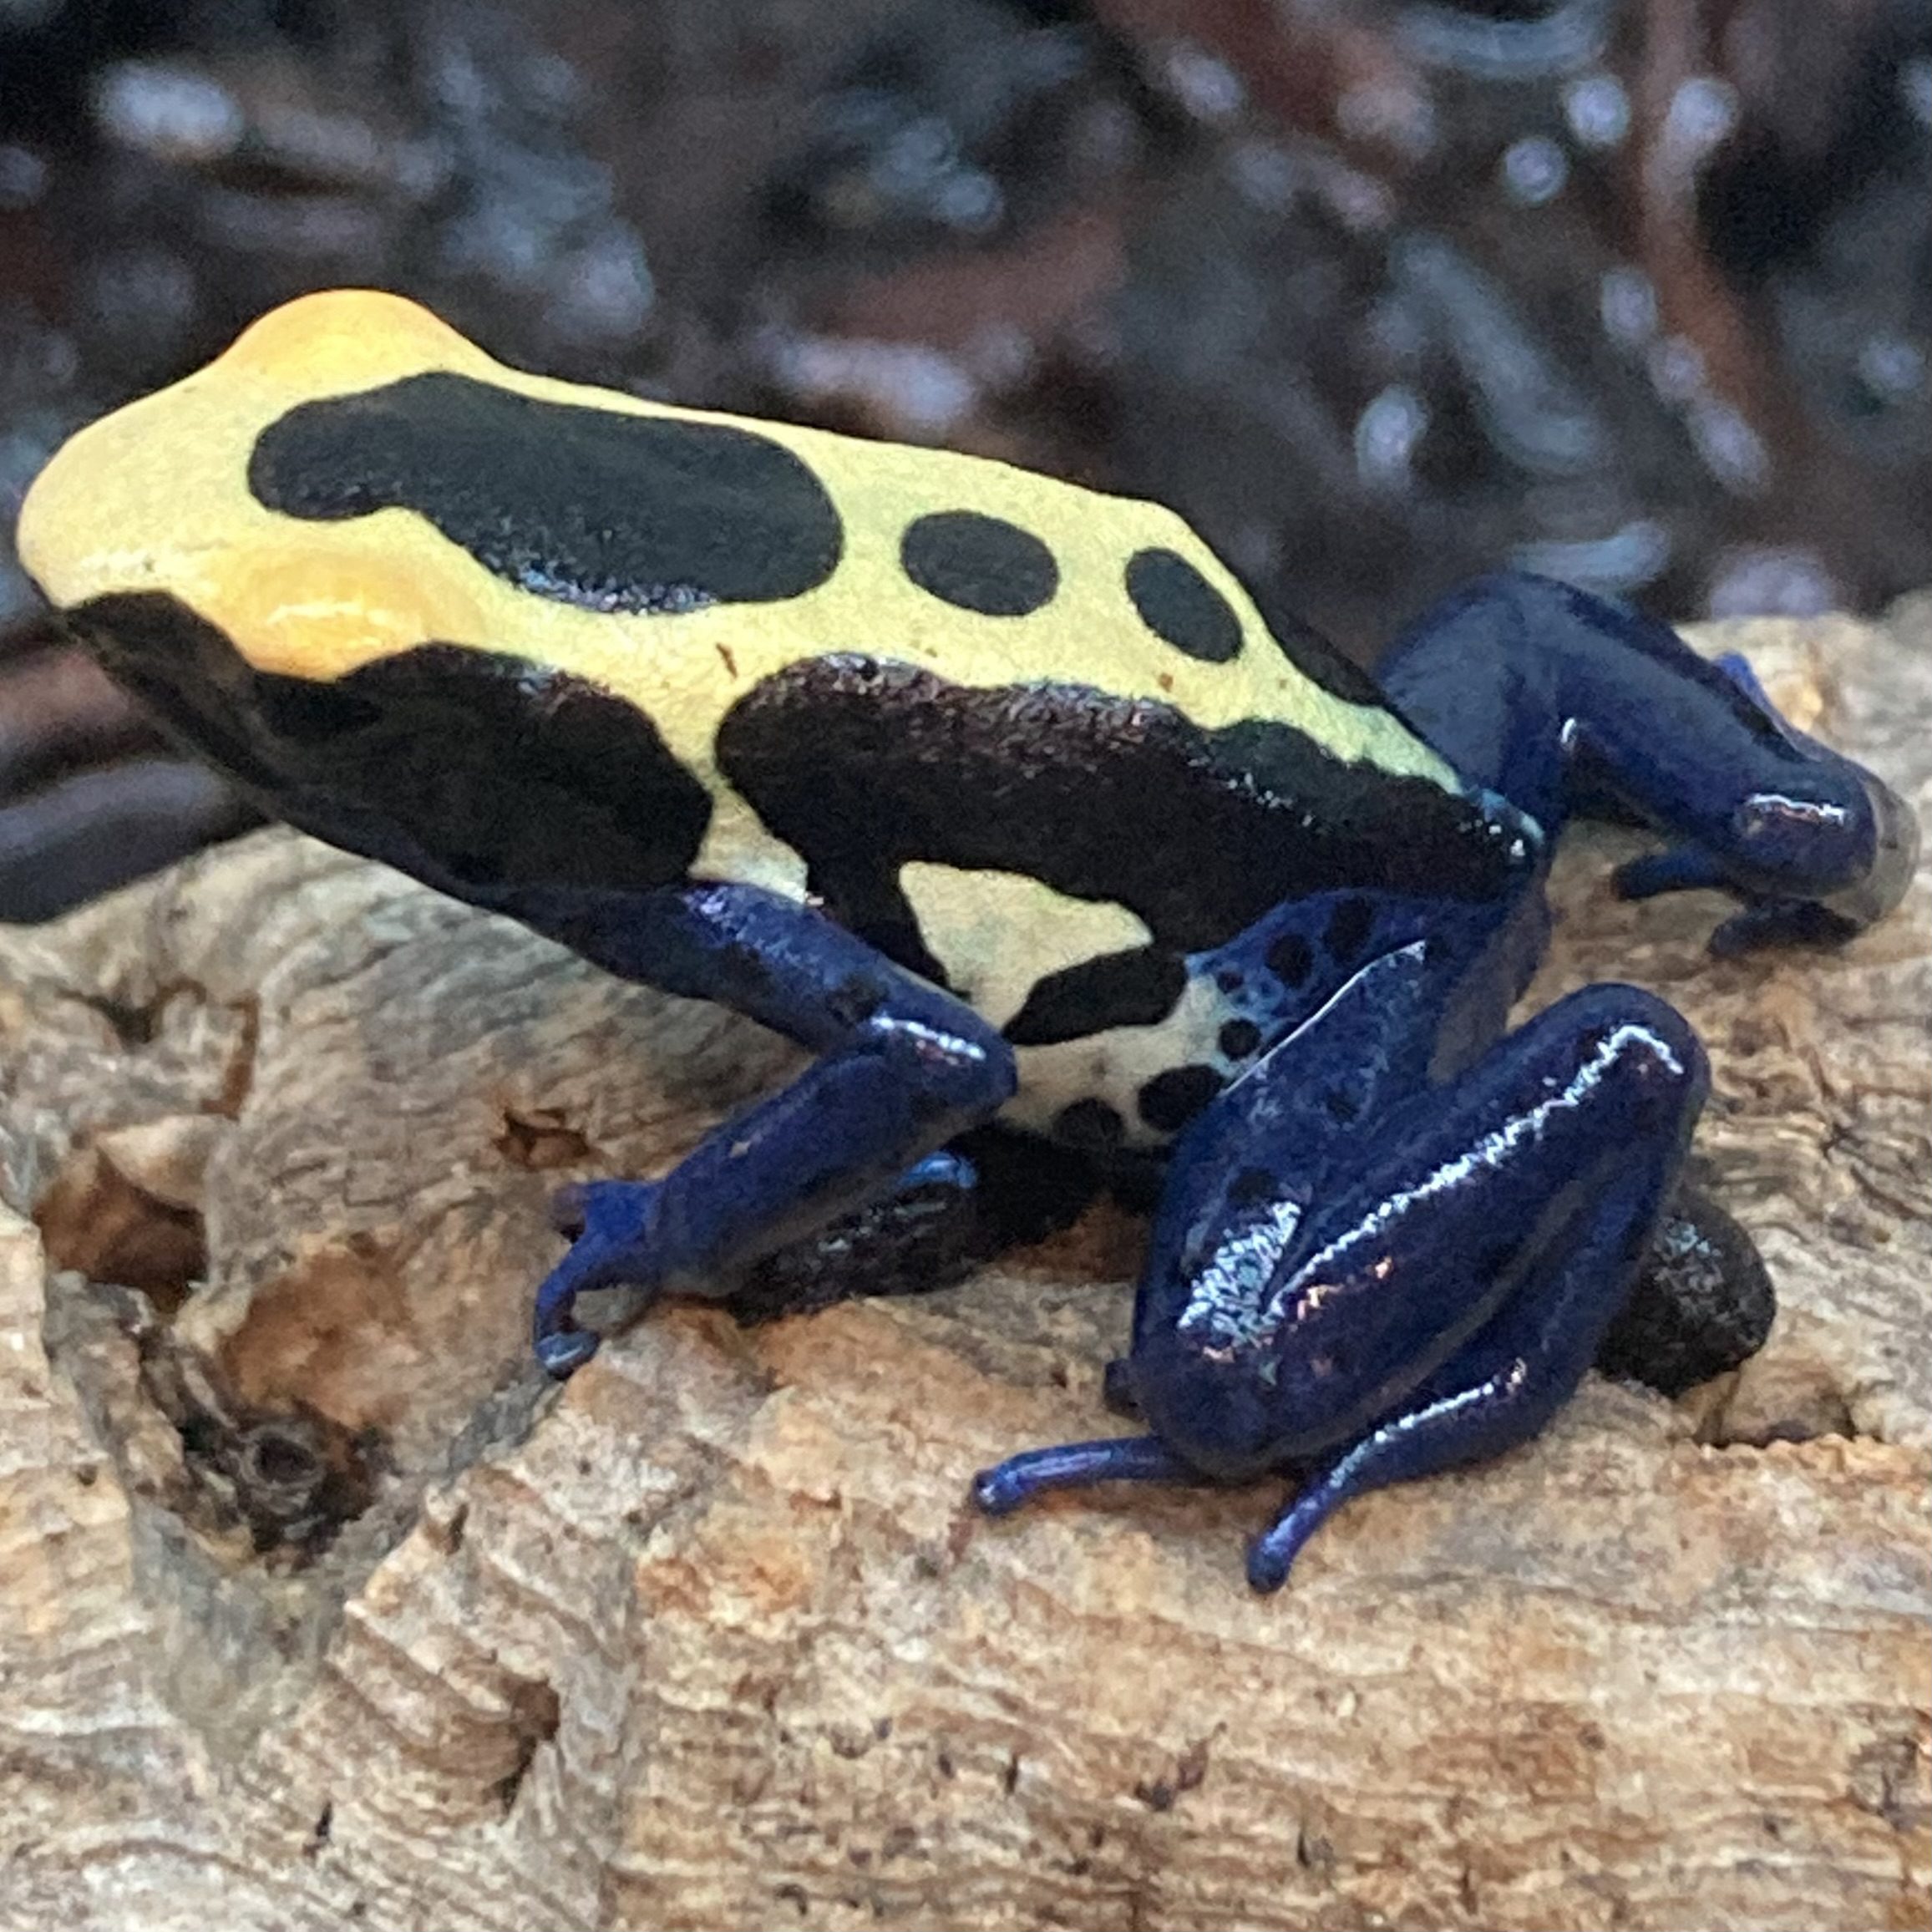 CB Dying Poison Arrow Frog 